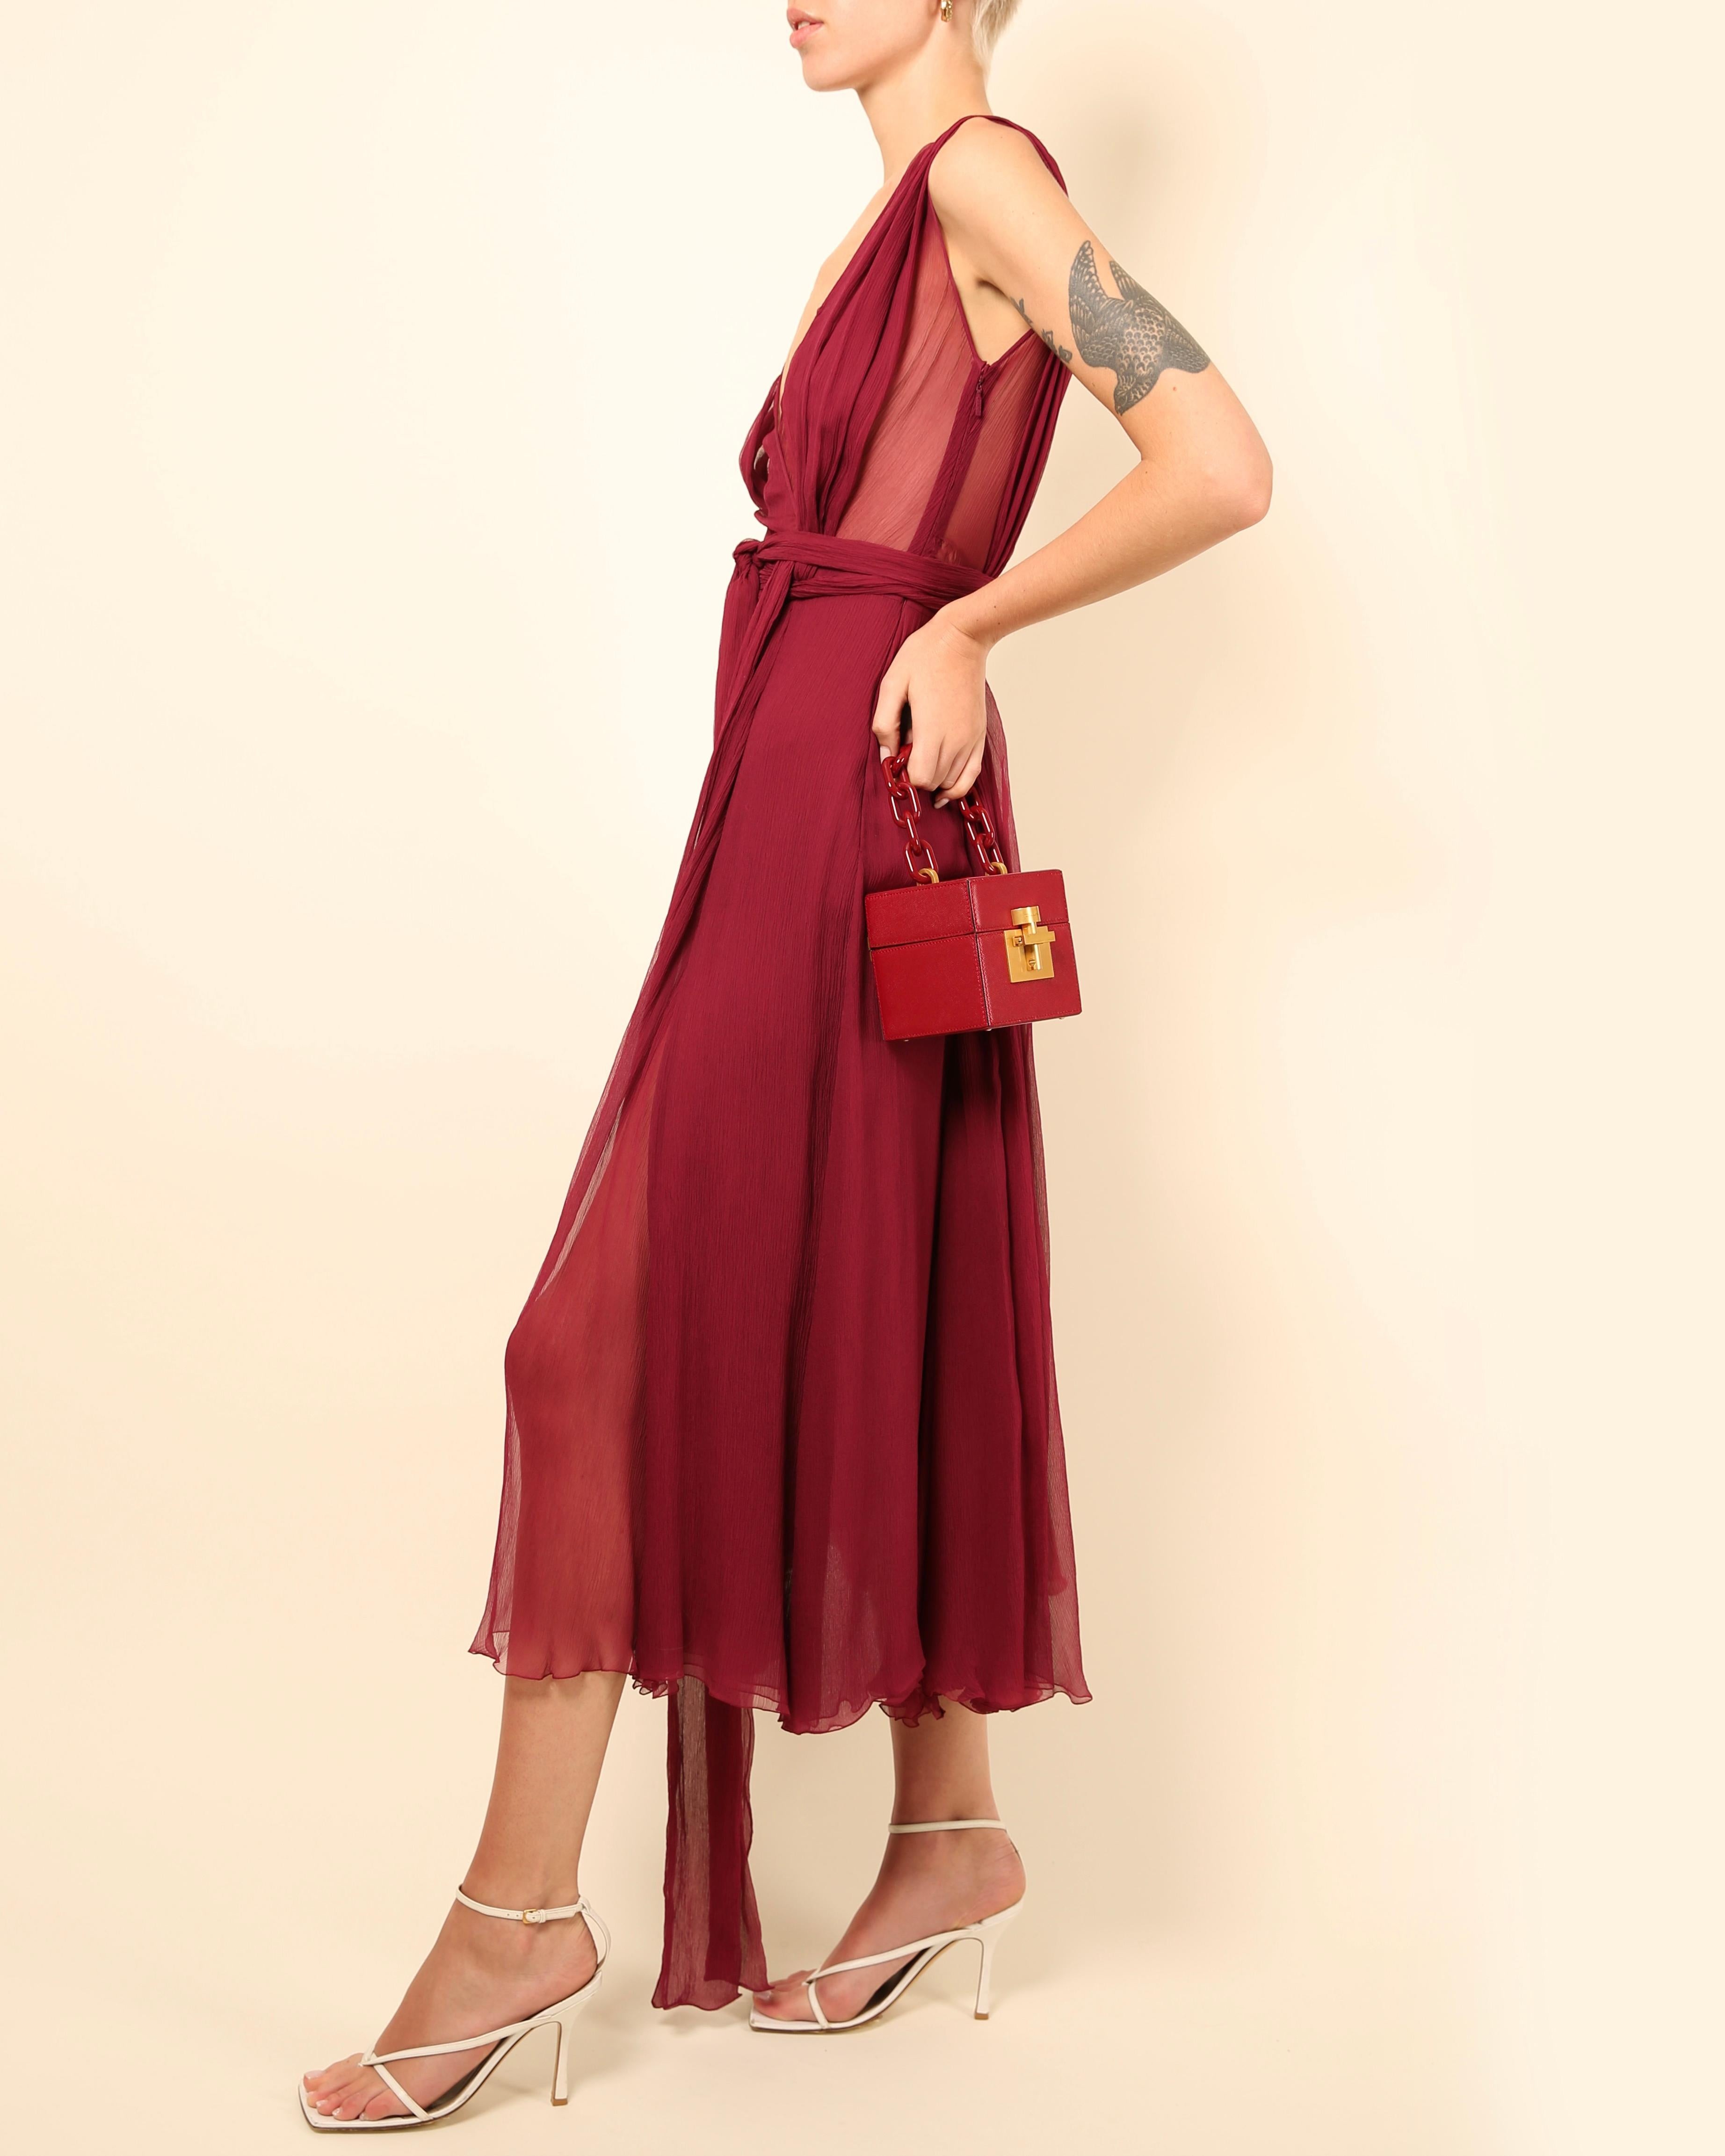 Gucci Fall 2011 burgundy chiffon silk plunging neckline sheer cut out gown dress For Sale 5